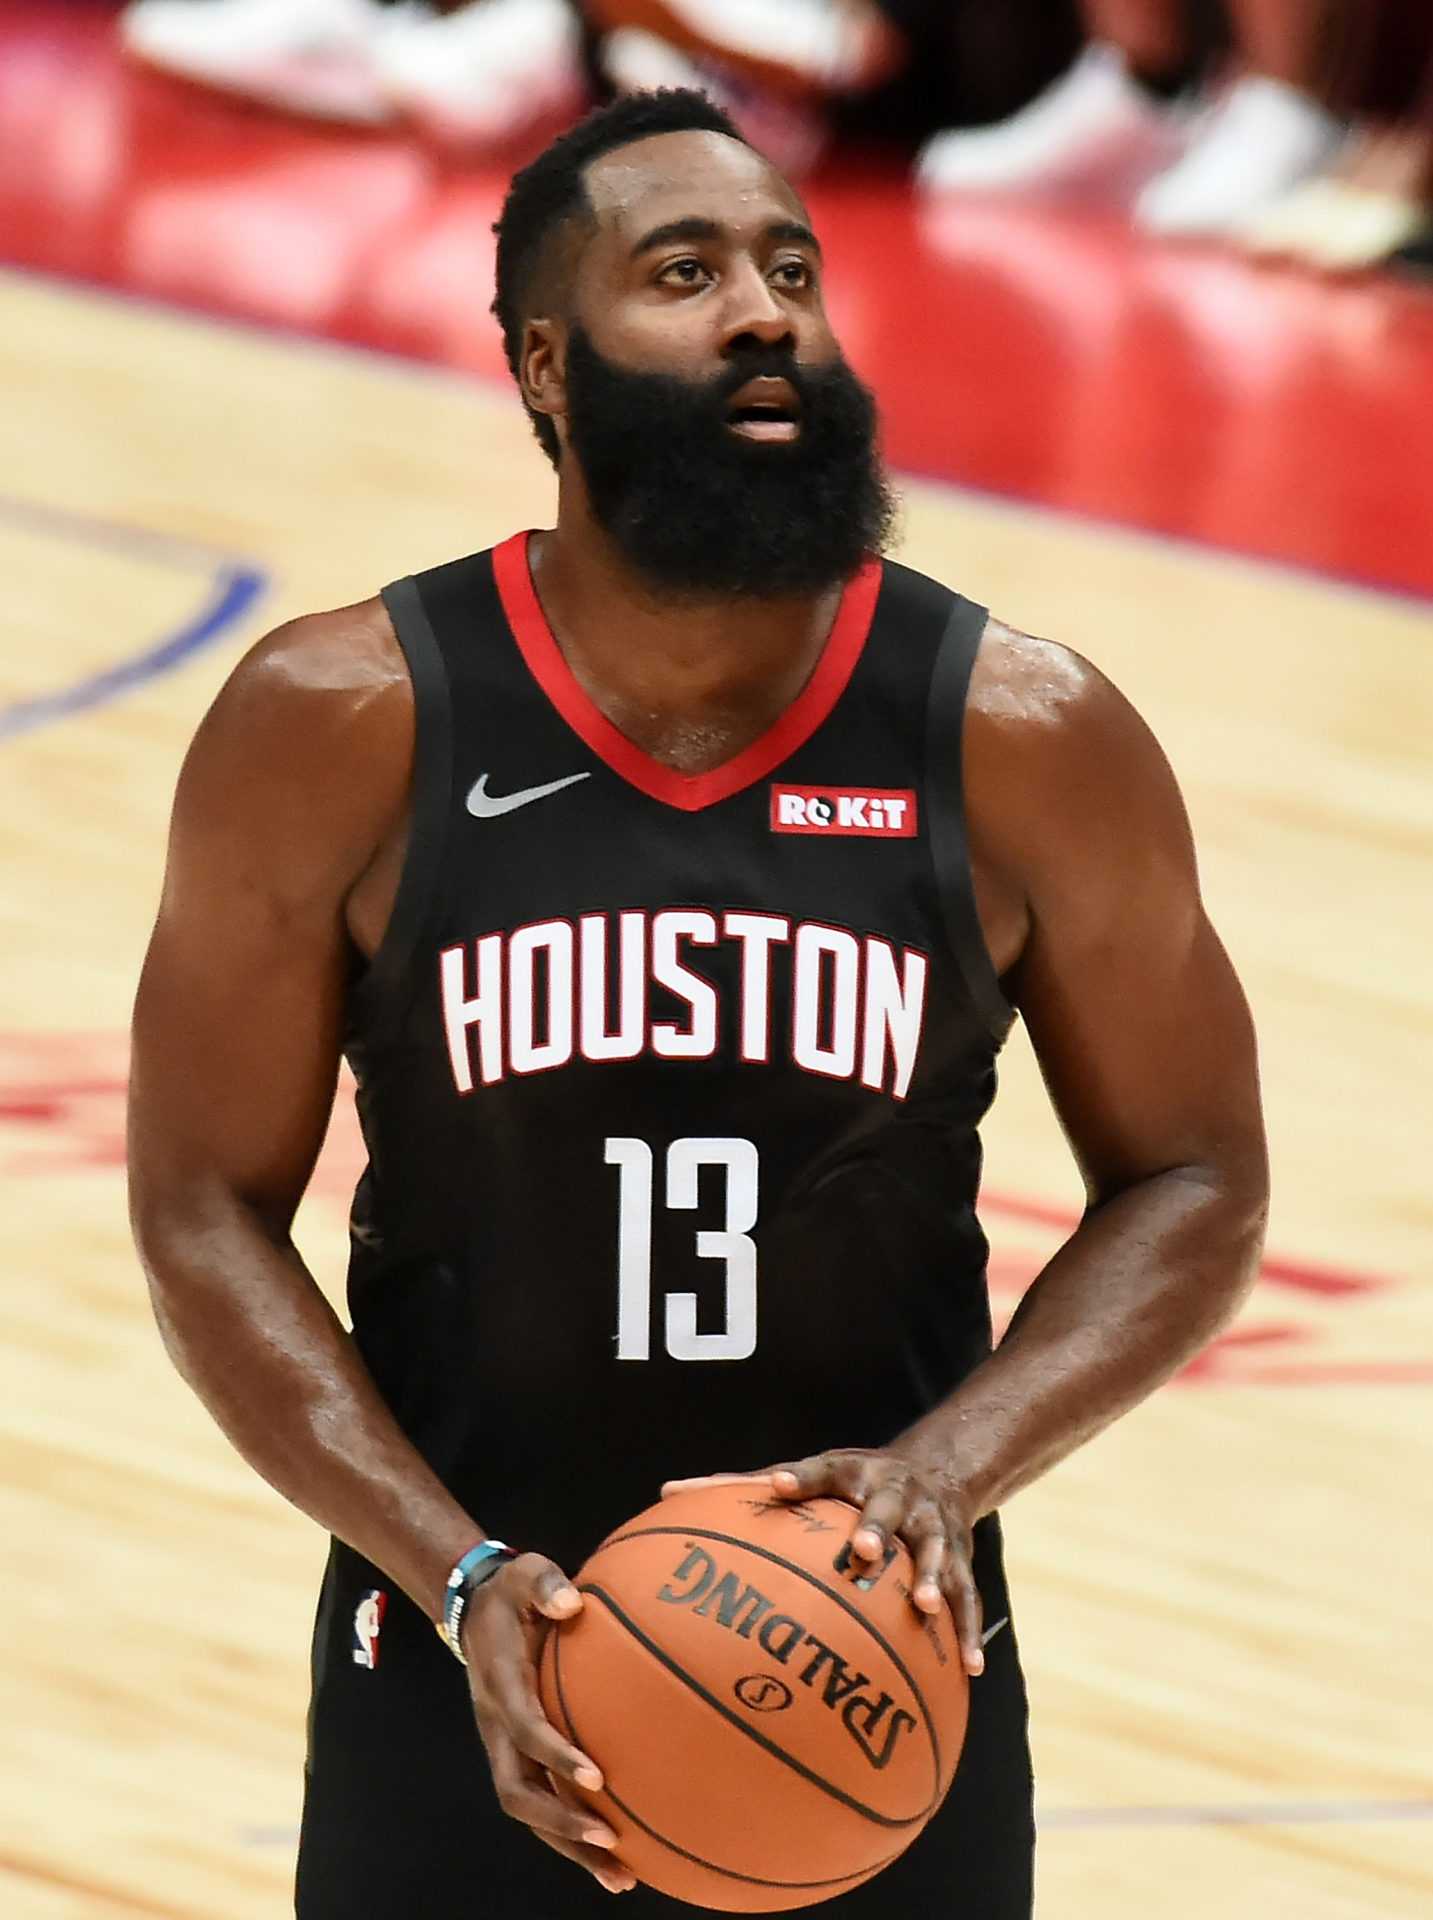 James Harden at the free throw line during a pre-season game